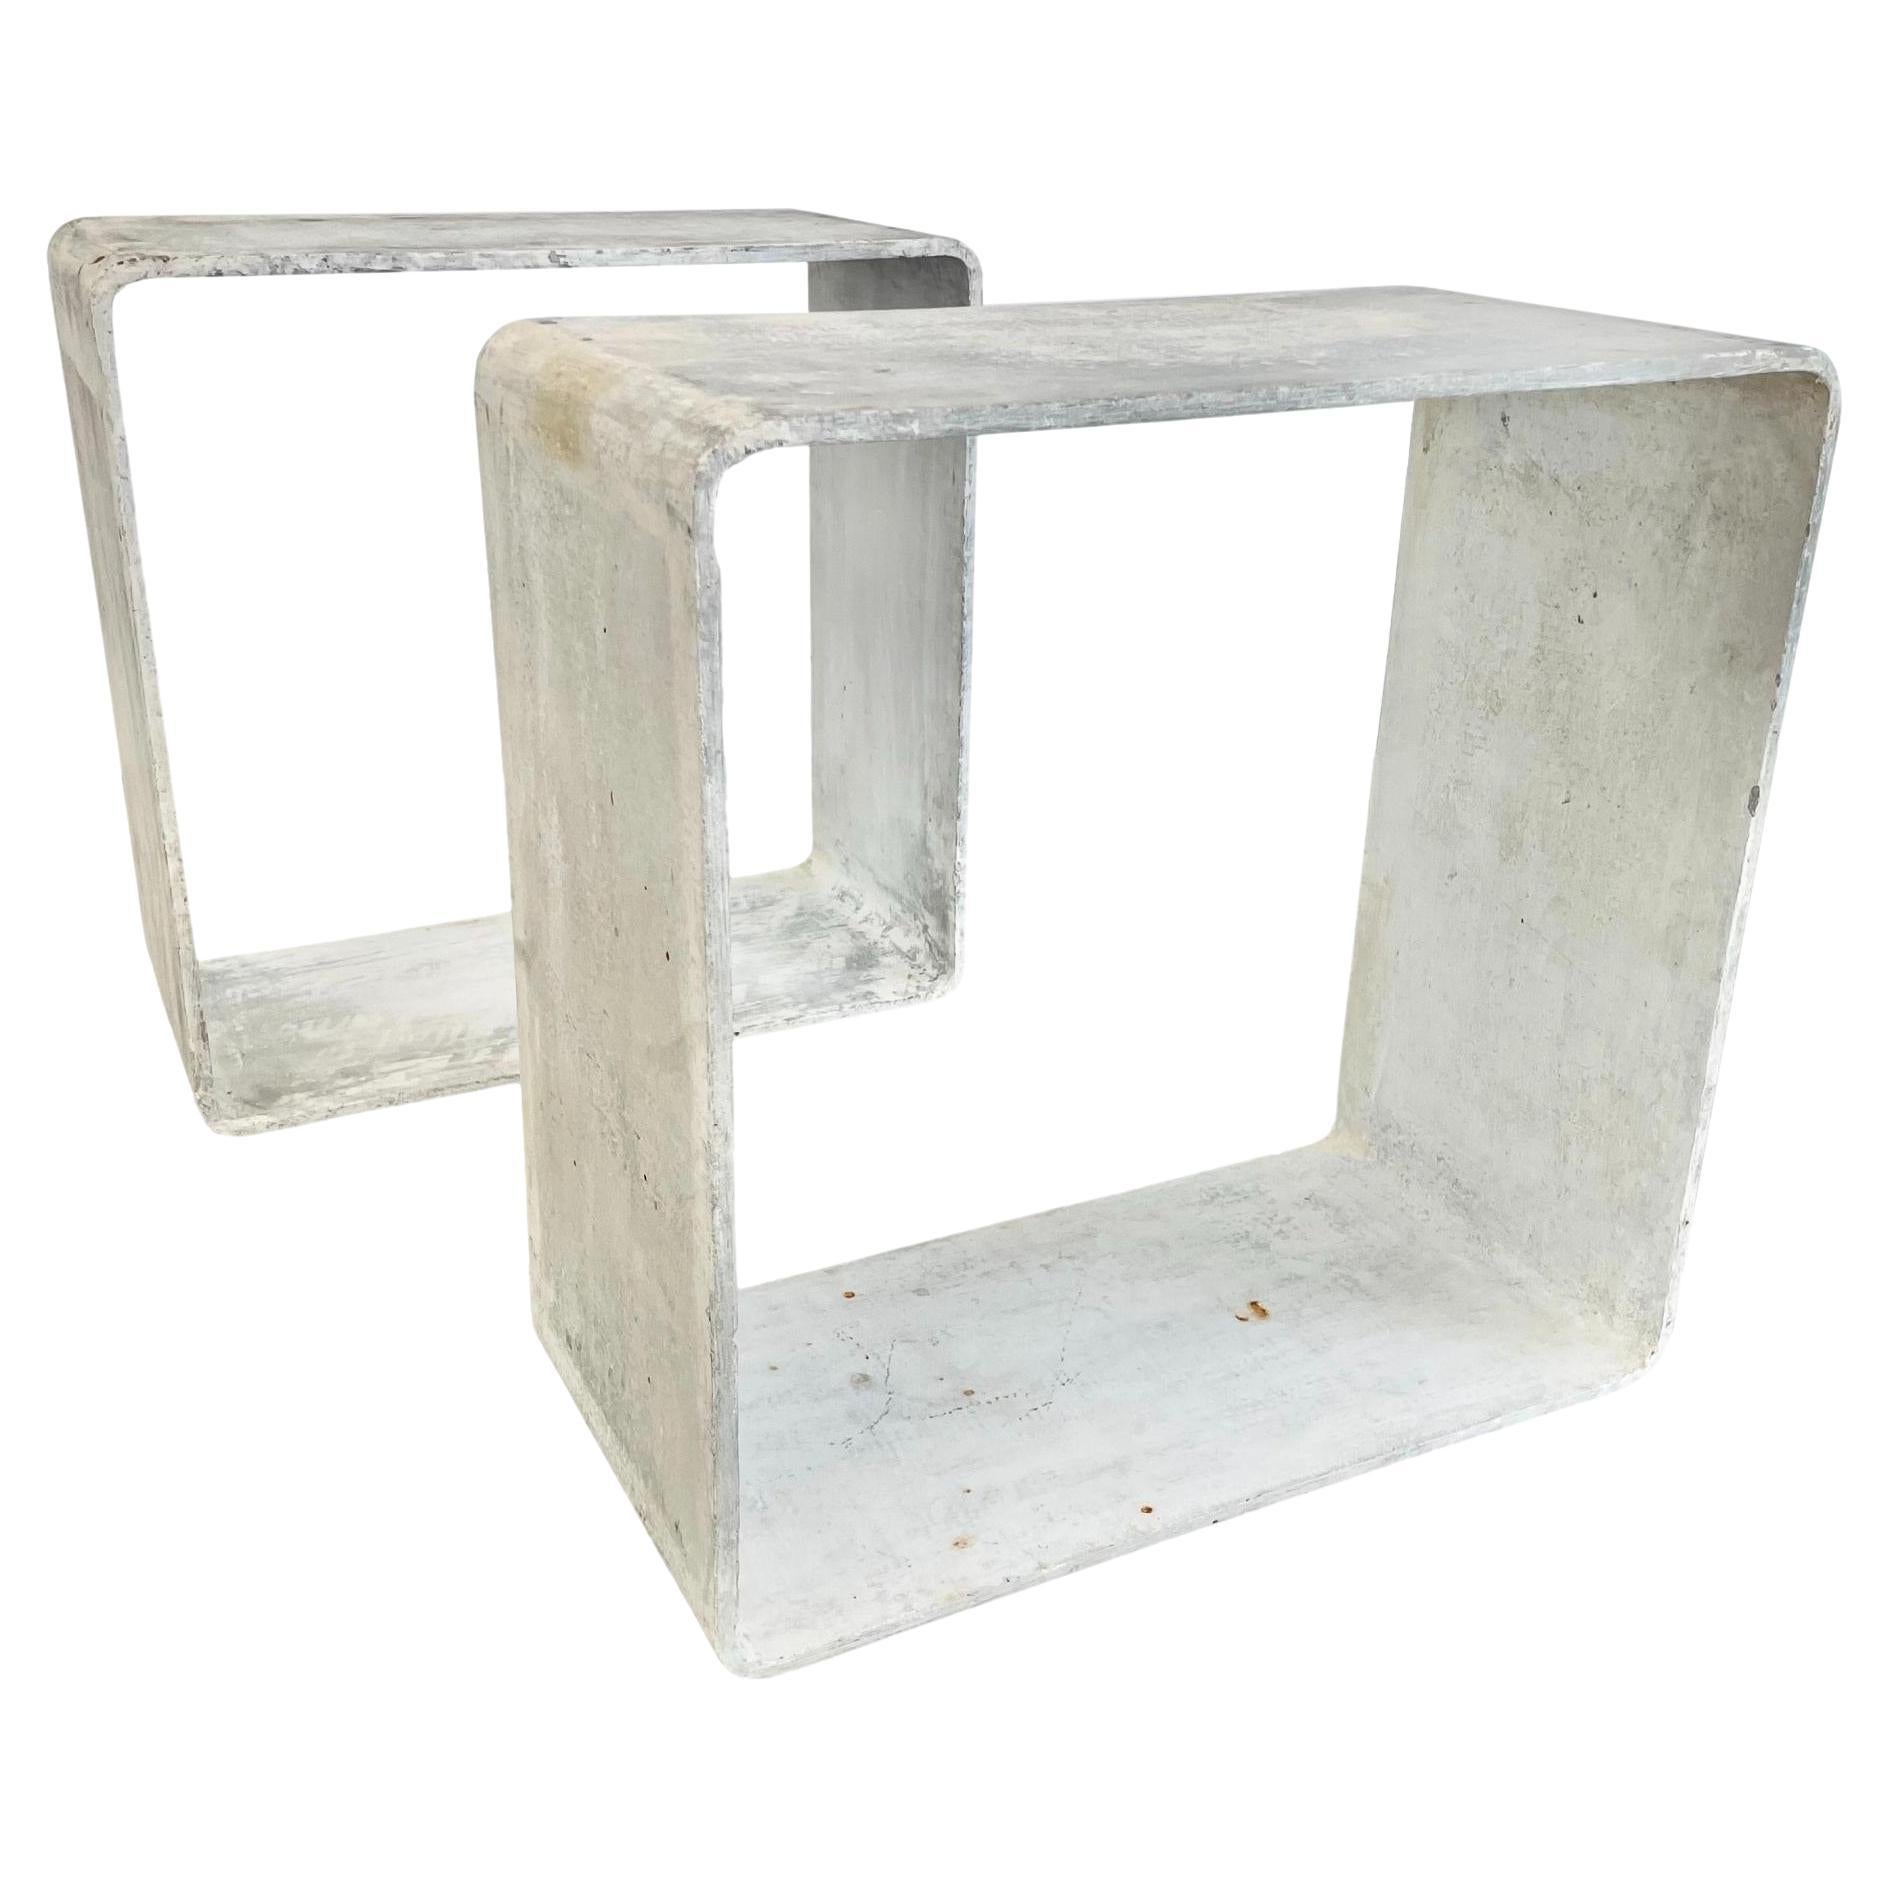 Willy Guhl Concrete Cube Side Table, 1960s Switzerland For Sale